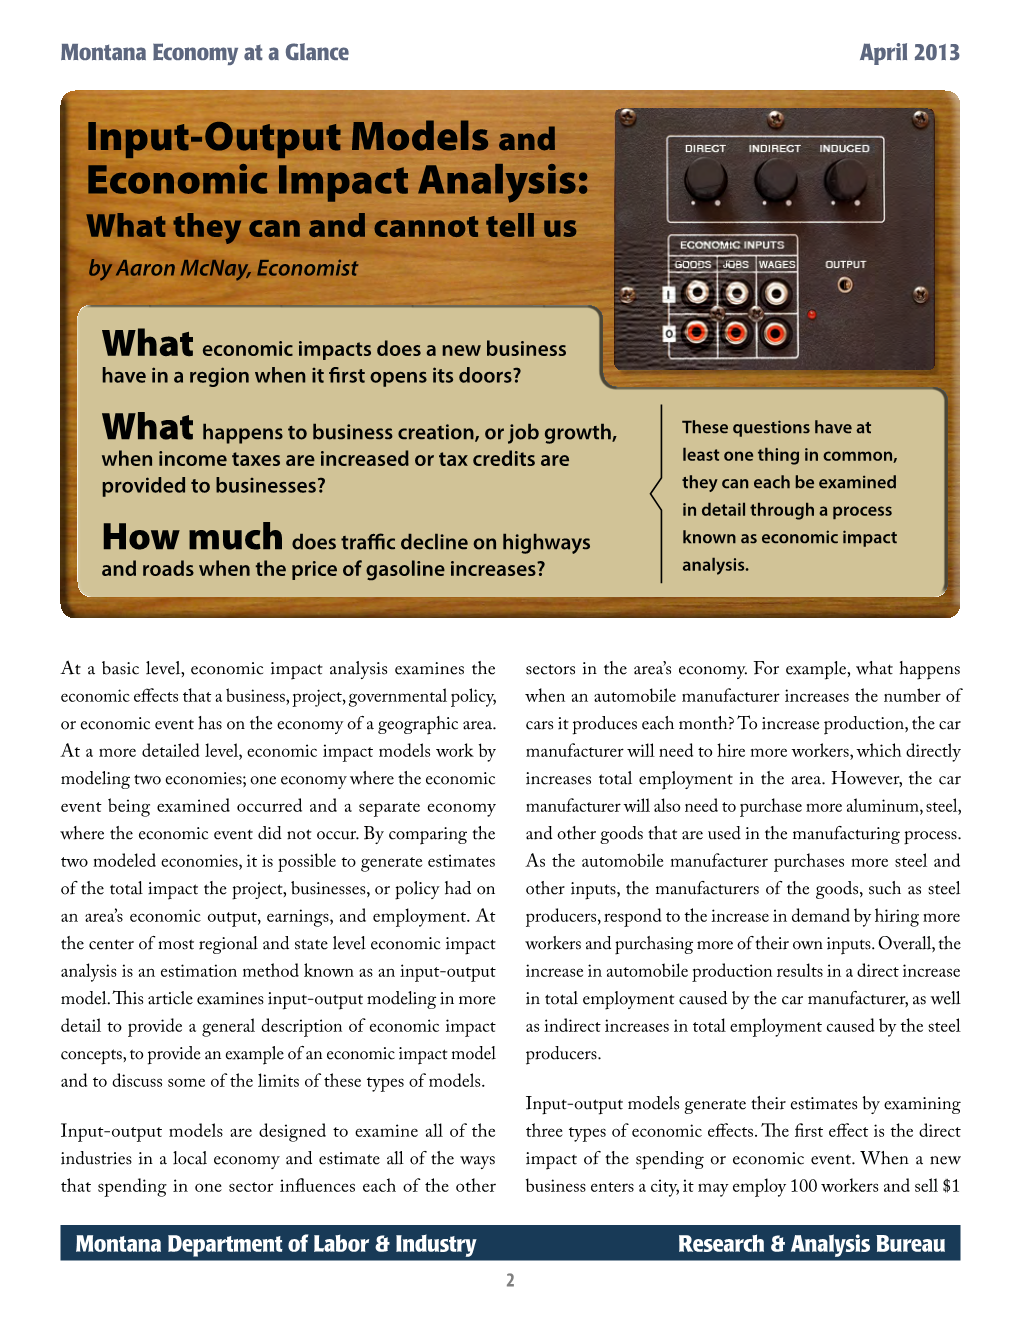 Input-Output Models and Economic Impact Analysis: What They Can and Cannot Tell Us by Aaron Mcnay, Economist